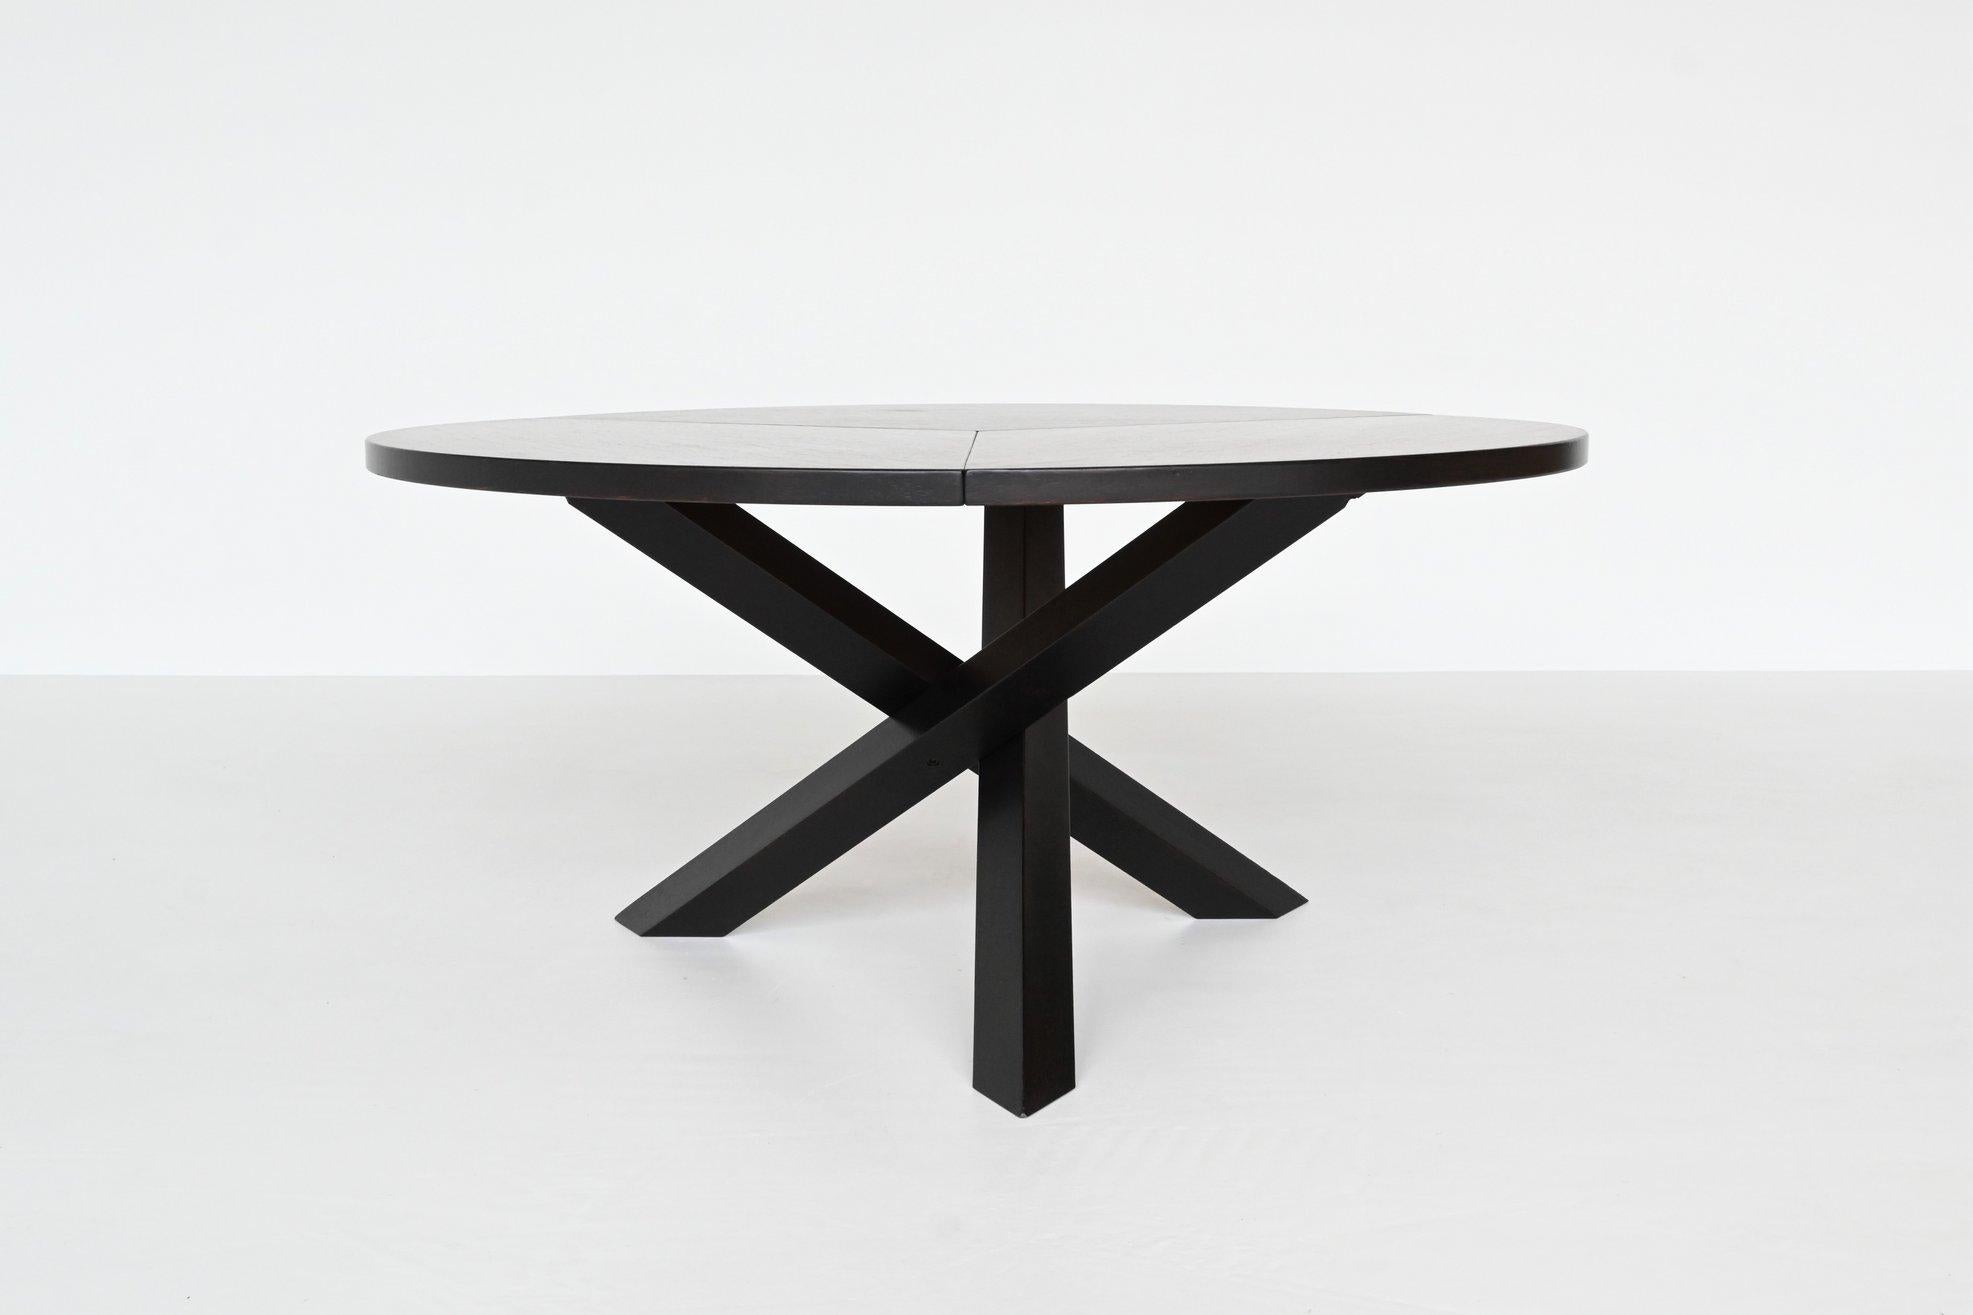 Beautiful sculptural dining table designed by Gerard Geytenbeek and manufactured by AZS Meubelen, The Netherlands 1960. This design is very often attributed to Martin Visser for ‘t Spectrum. The base consist of three crossed legs of solid darkened